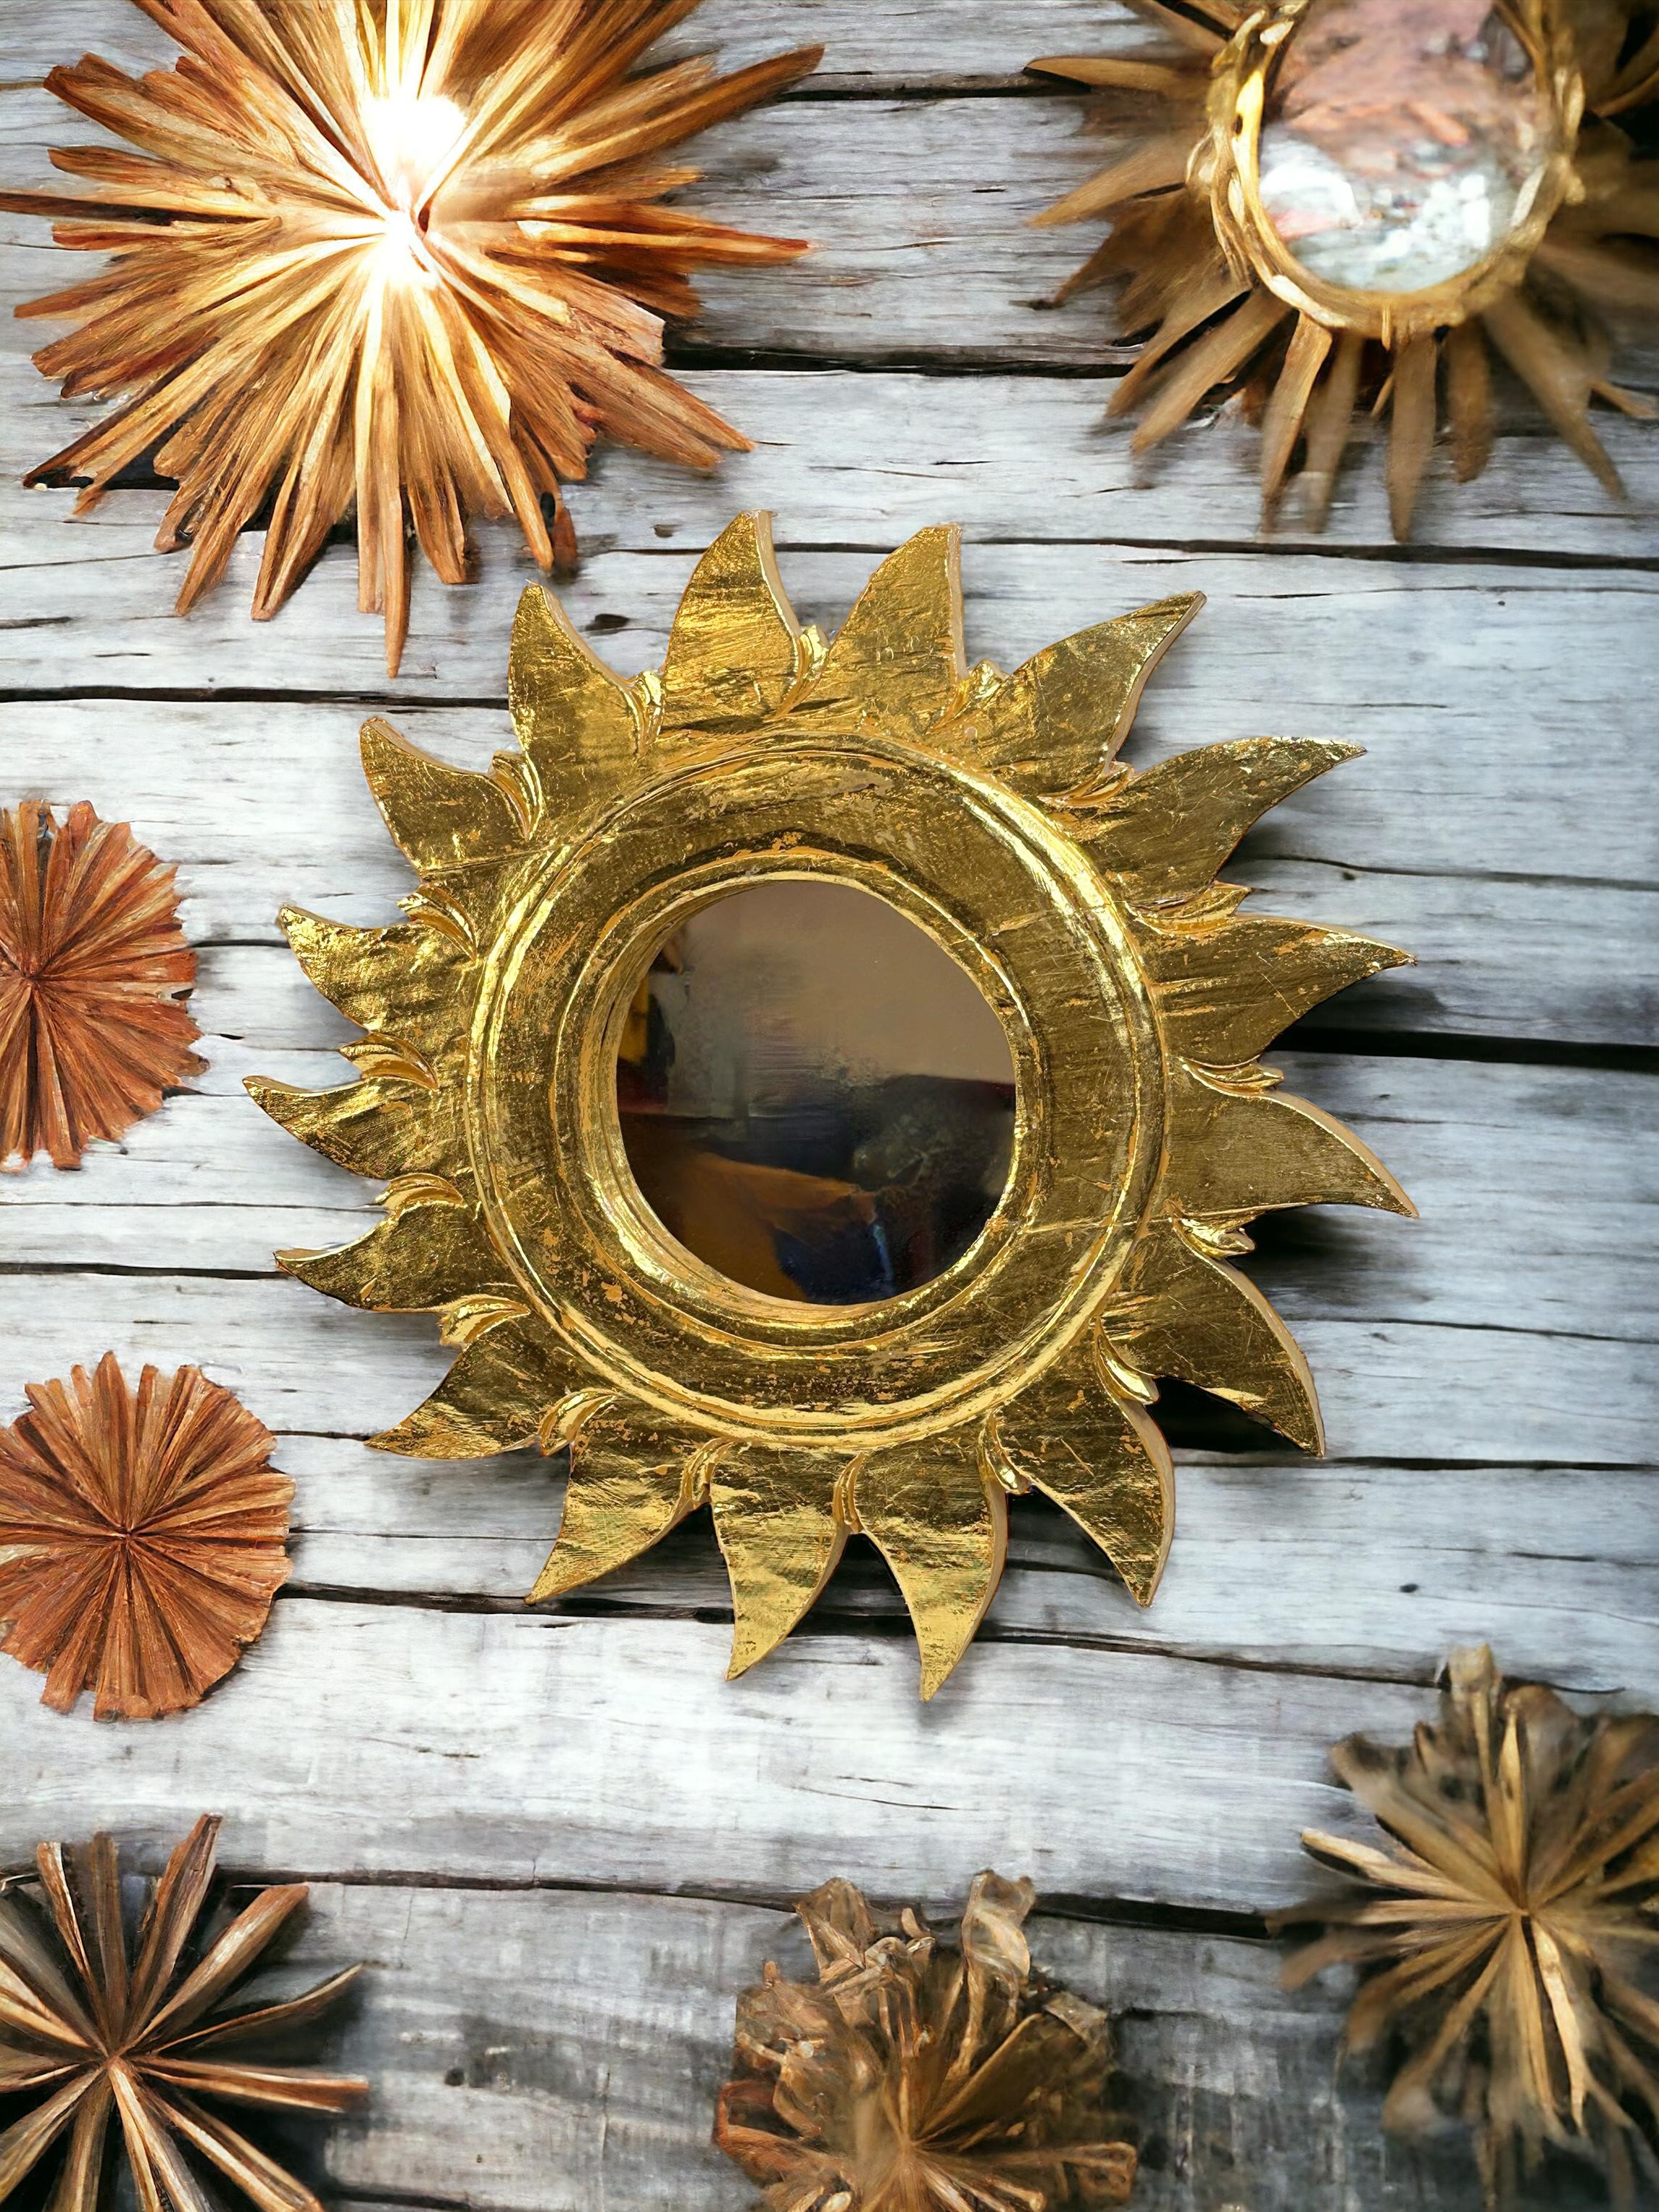 A gorgeous starburst sunburst mirror. Made of gilded wood and composition. It measures approximate: 19.5